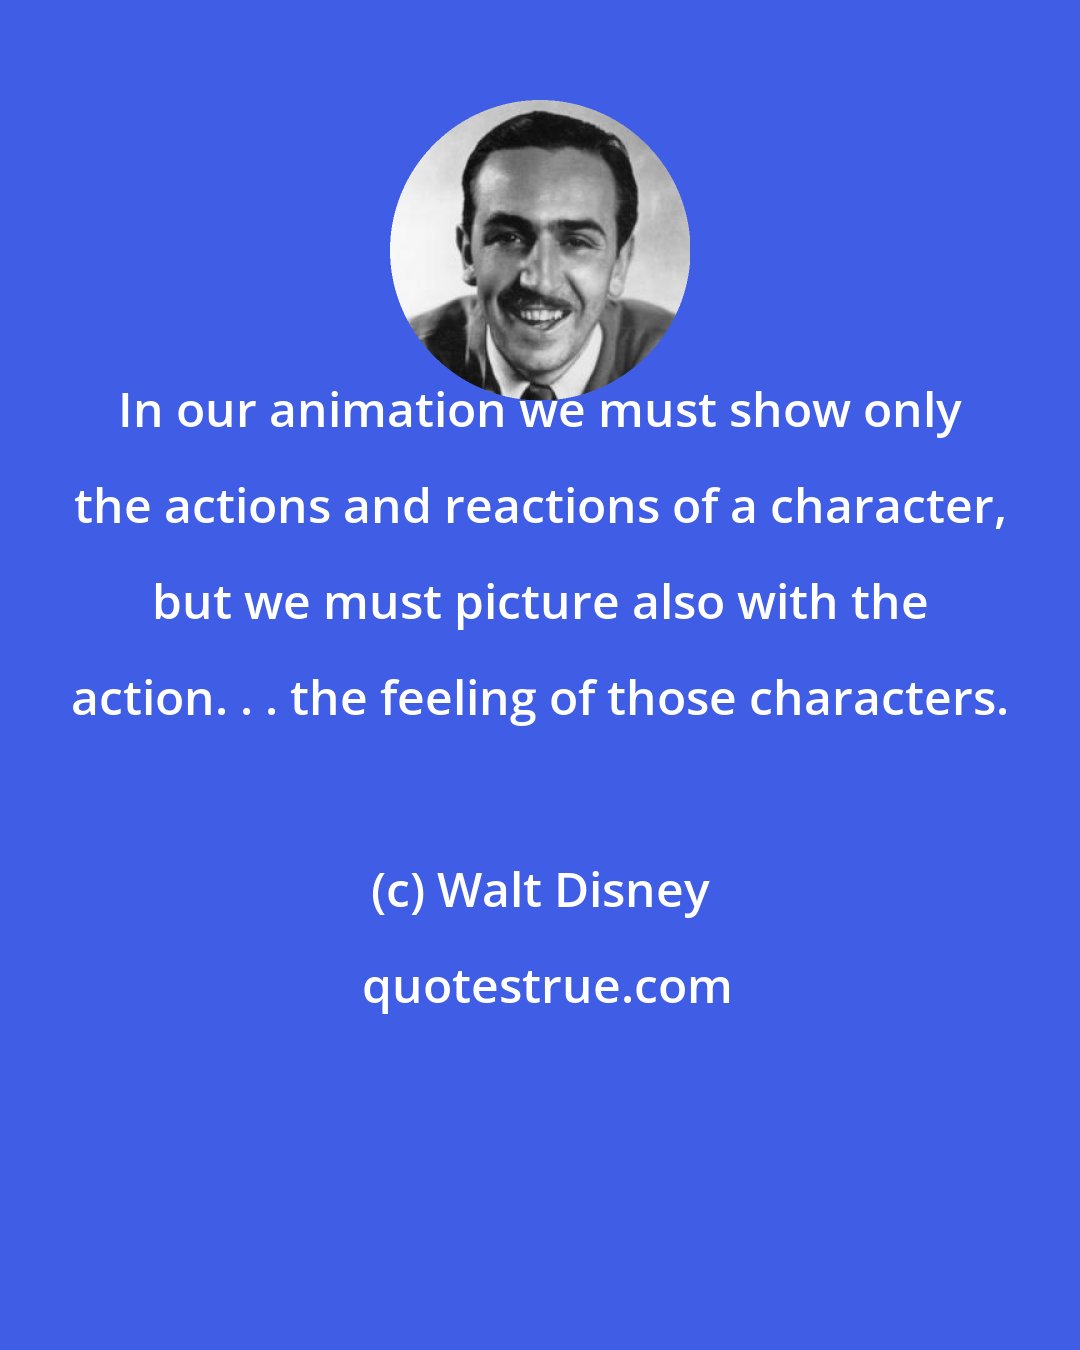 Walt Disney: In our animation we must show only the actions and reactions of a character, but we must picture also with the action. . . the feeling of those characters.